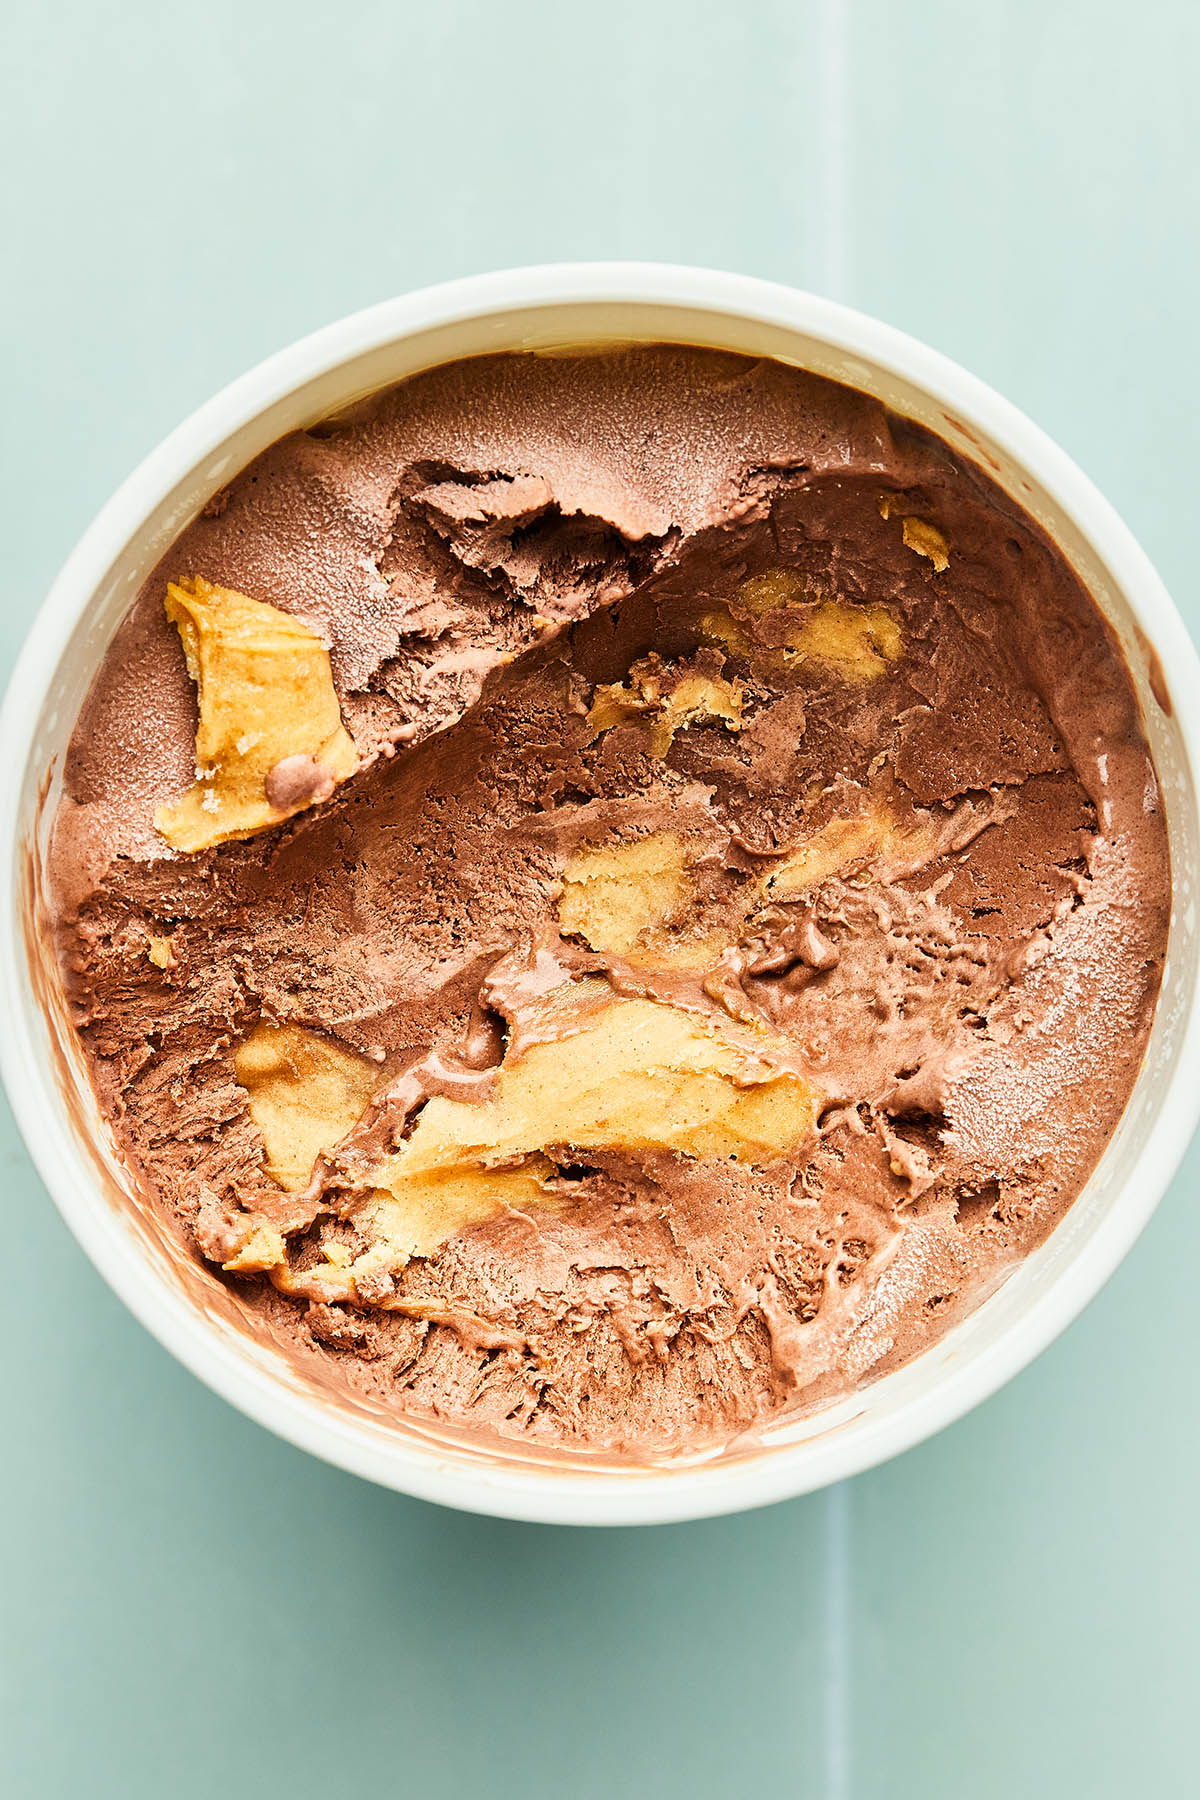 Chocolate peanut butter ice cream in a white bowl on a teal counter top.